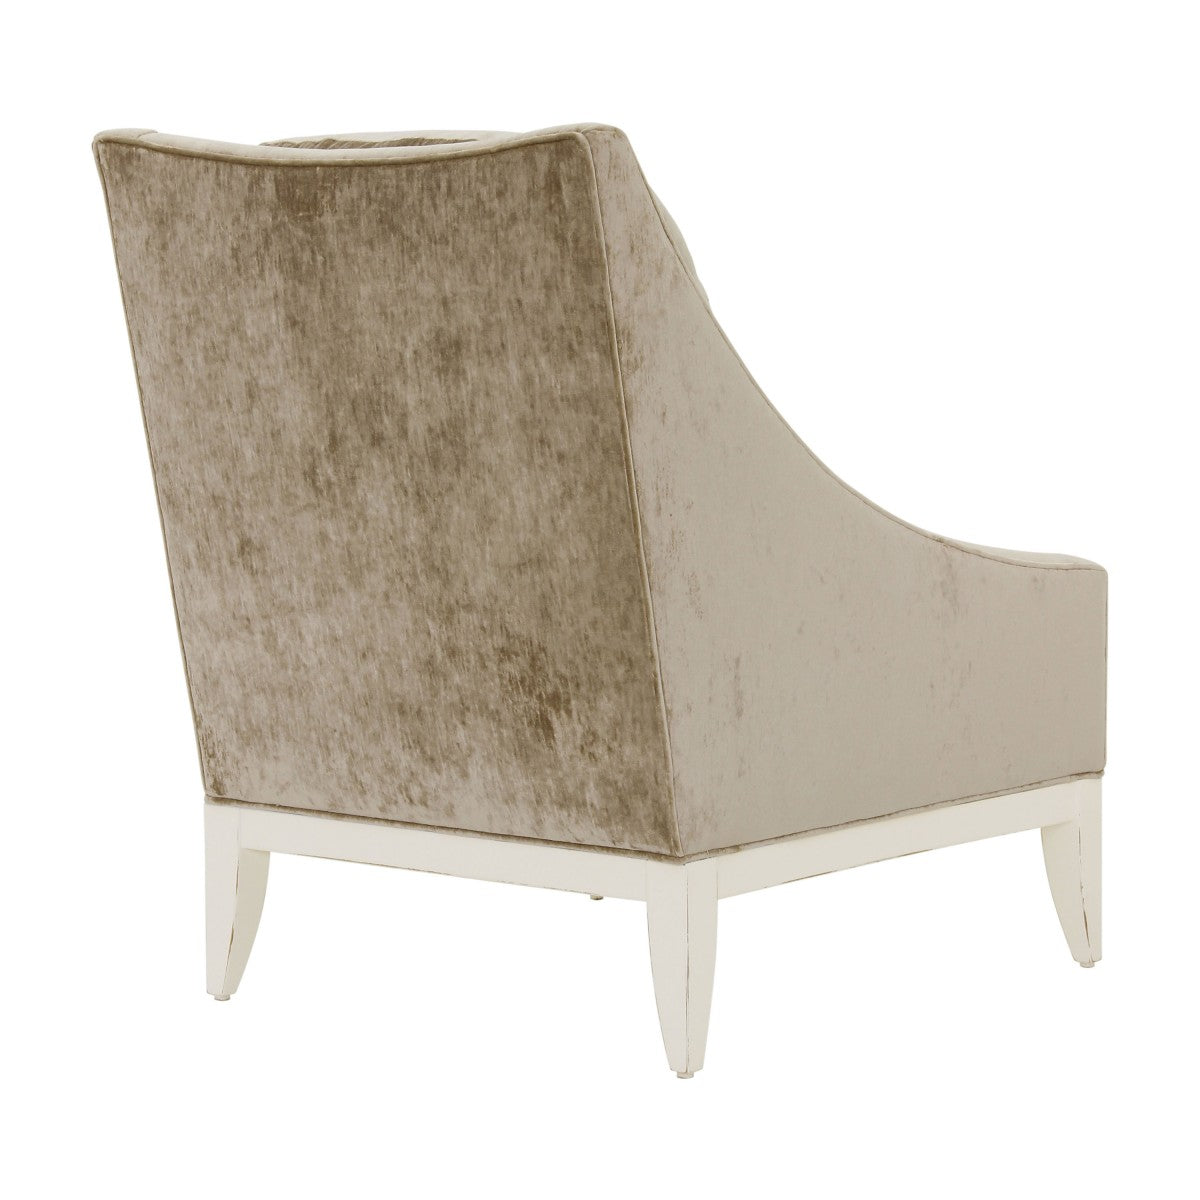 Dorotea Bespoke Upholstered Contemporary Armchair MS595P Custom Made To Order